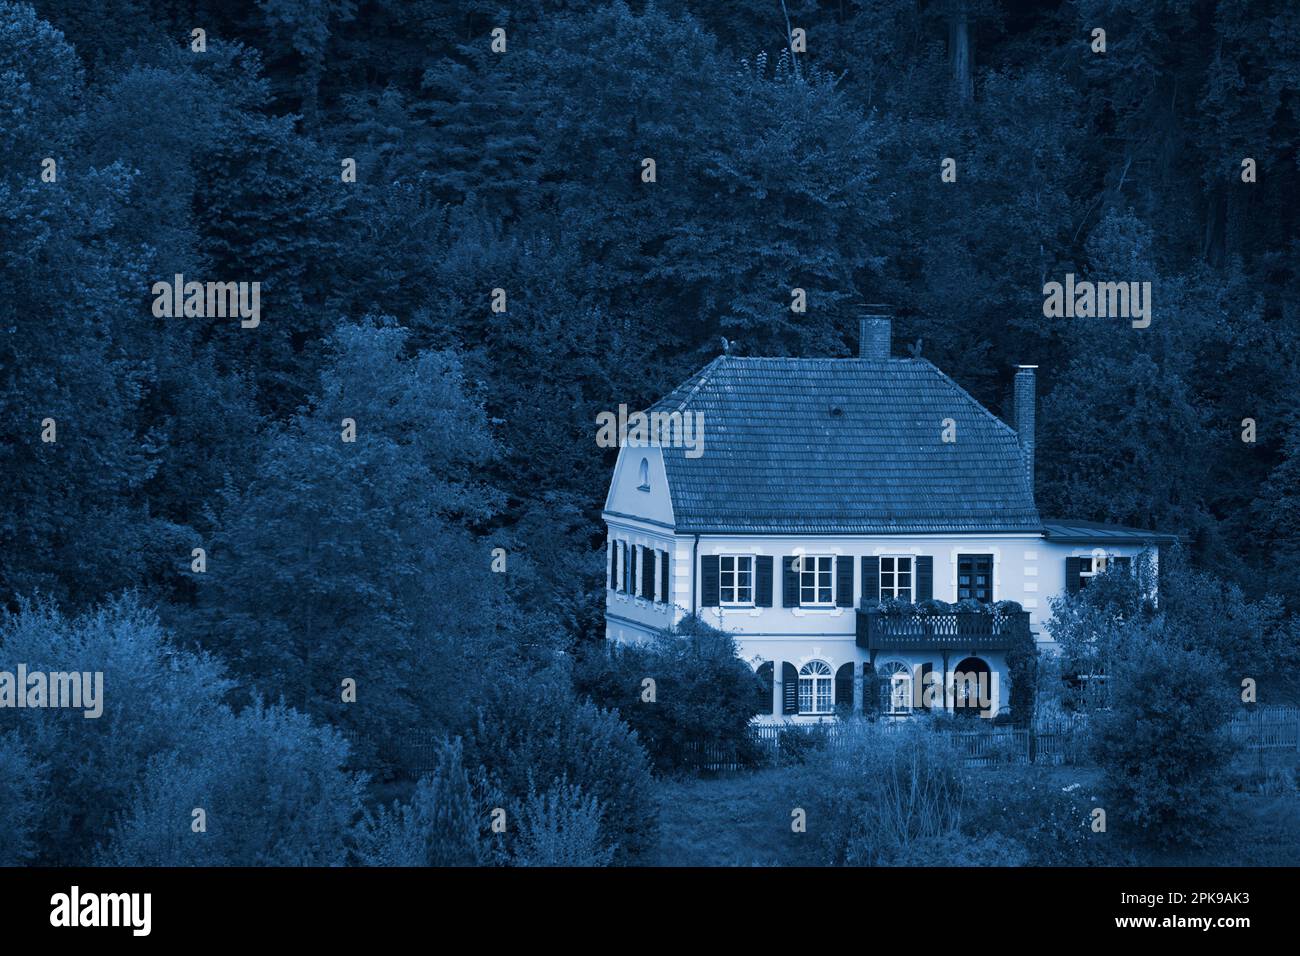 Germany, Bavaria, Upper Bavaria, Altötting district, villa, old building, hipped roof, shutters, single, edge of forest, trees, bushes, evening, twilight, picture colored night blue Stock Photo